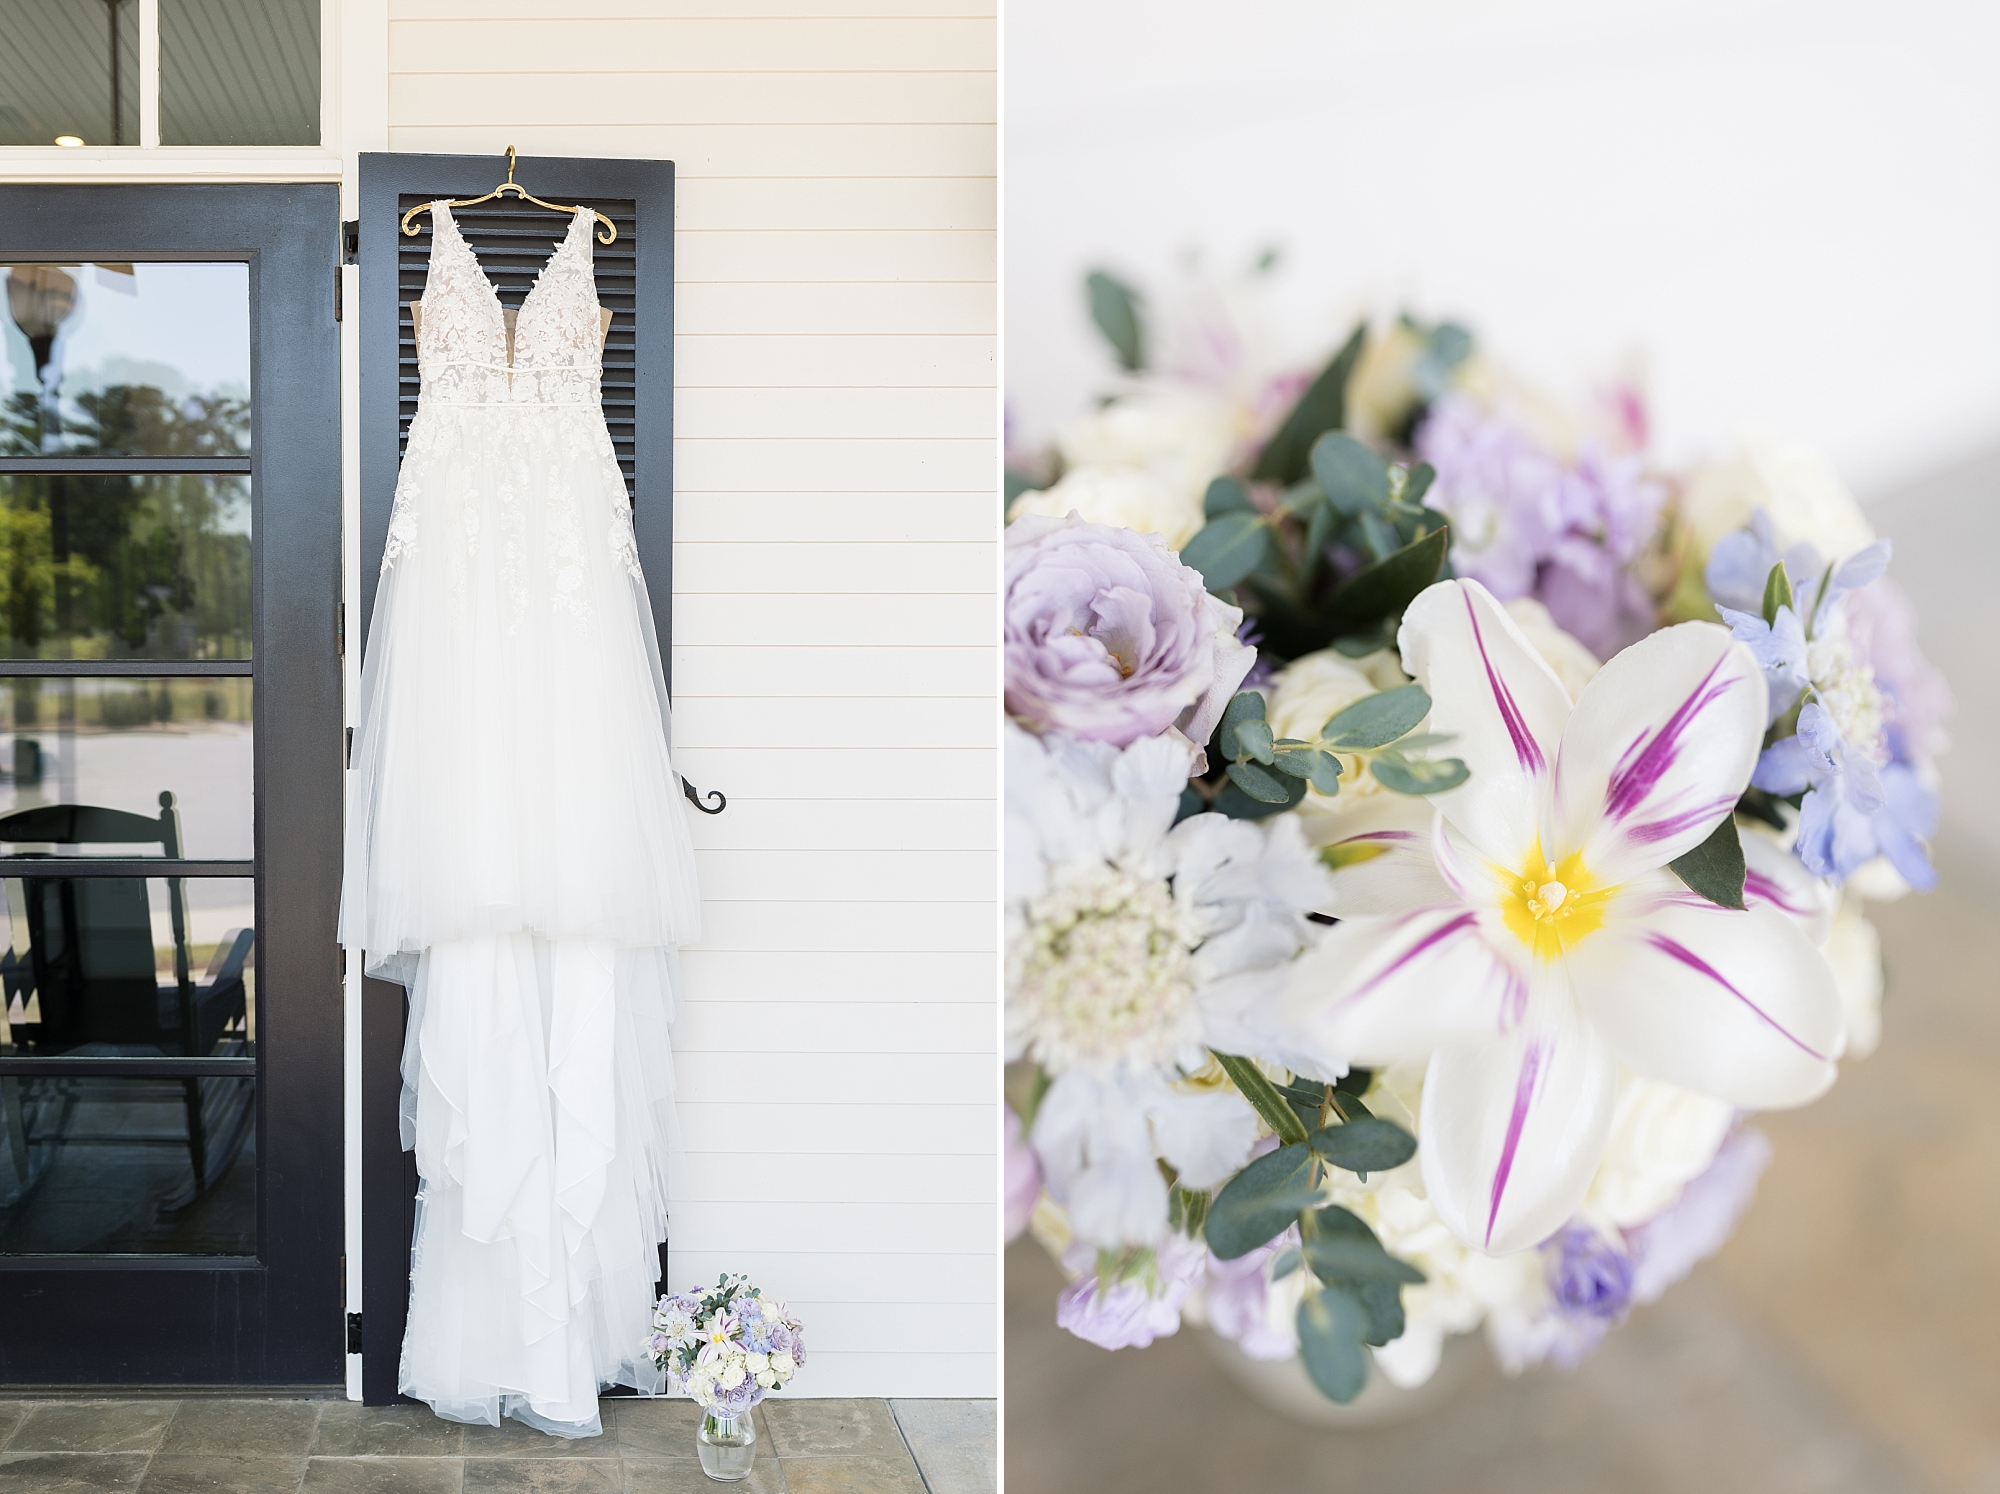 Bridal gown and florals for spring country club wedding - Raleigh NC Wedding Photographer - Sarah Hinckley Photography